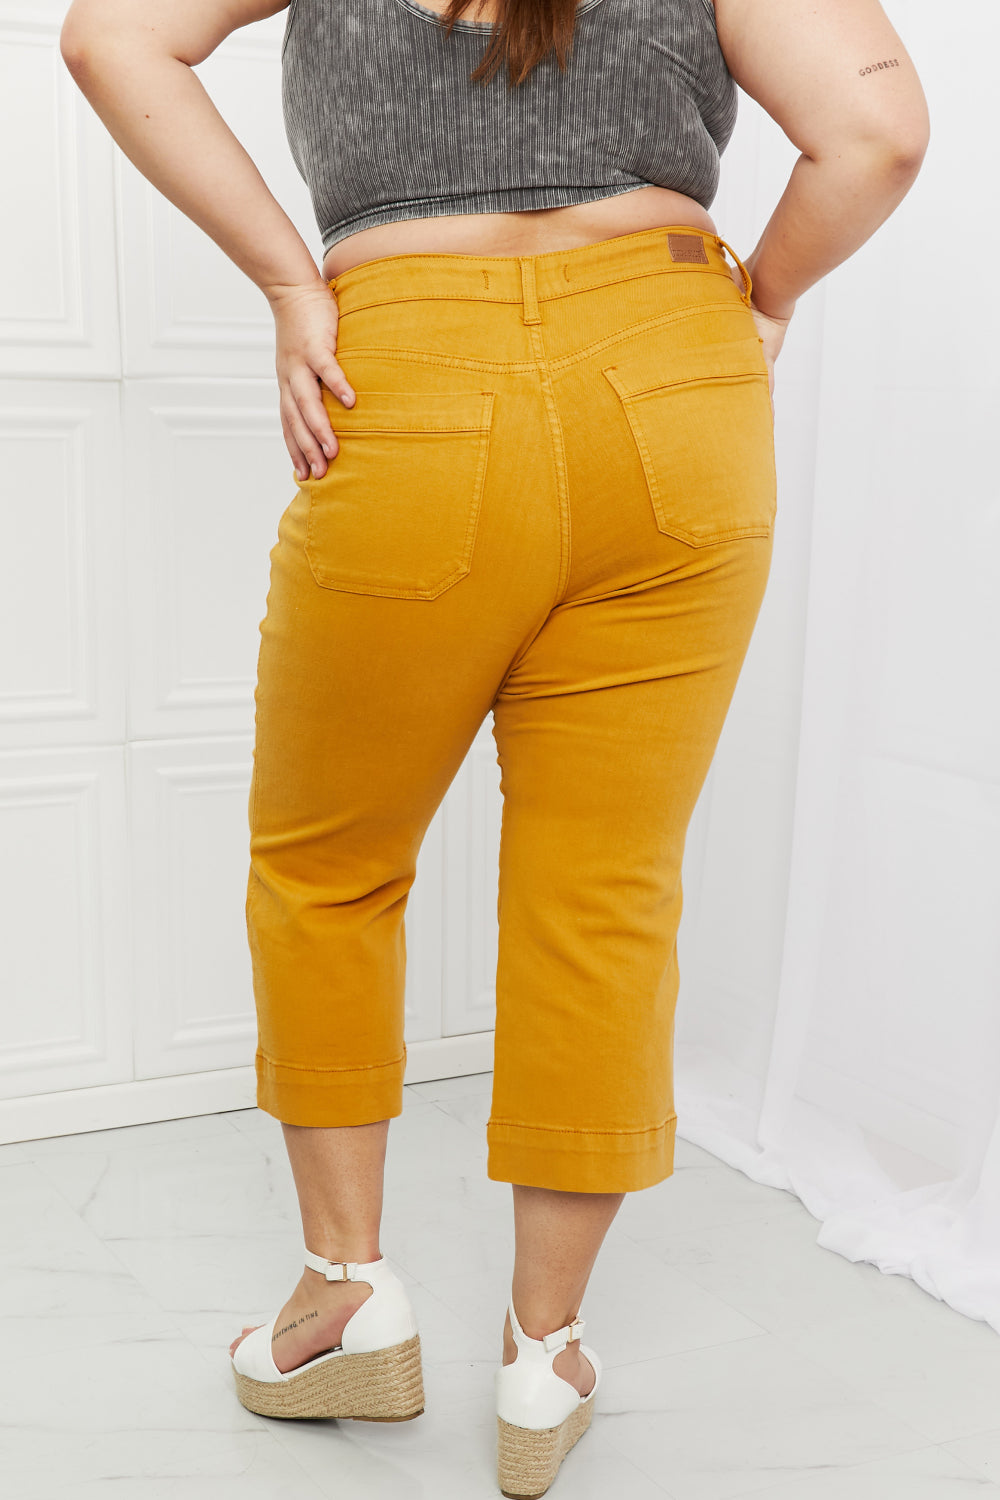 Full Size Straight Leg Cropped Jeans Pants